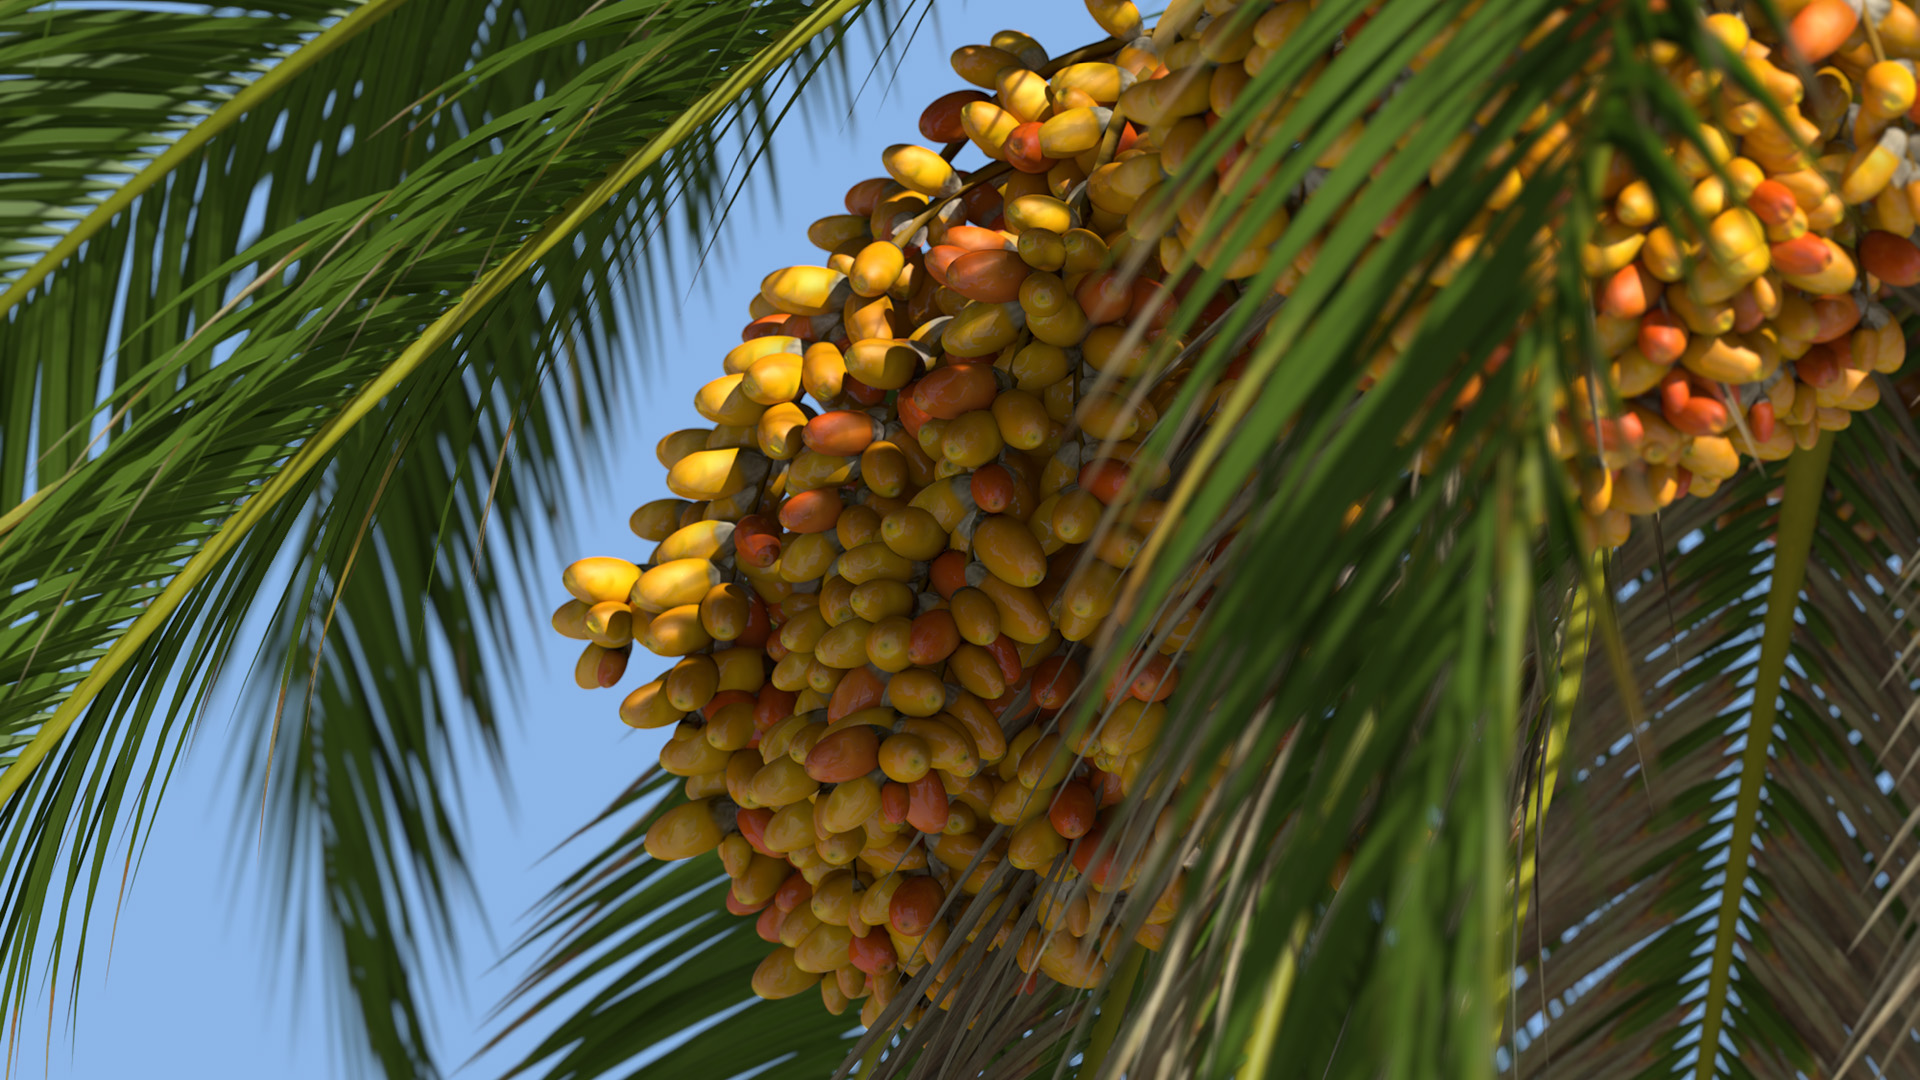 3D model of the Canary Island date palm Phoenix canariensis